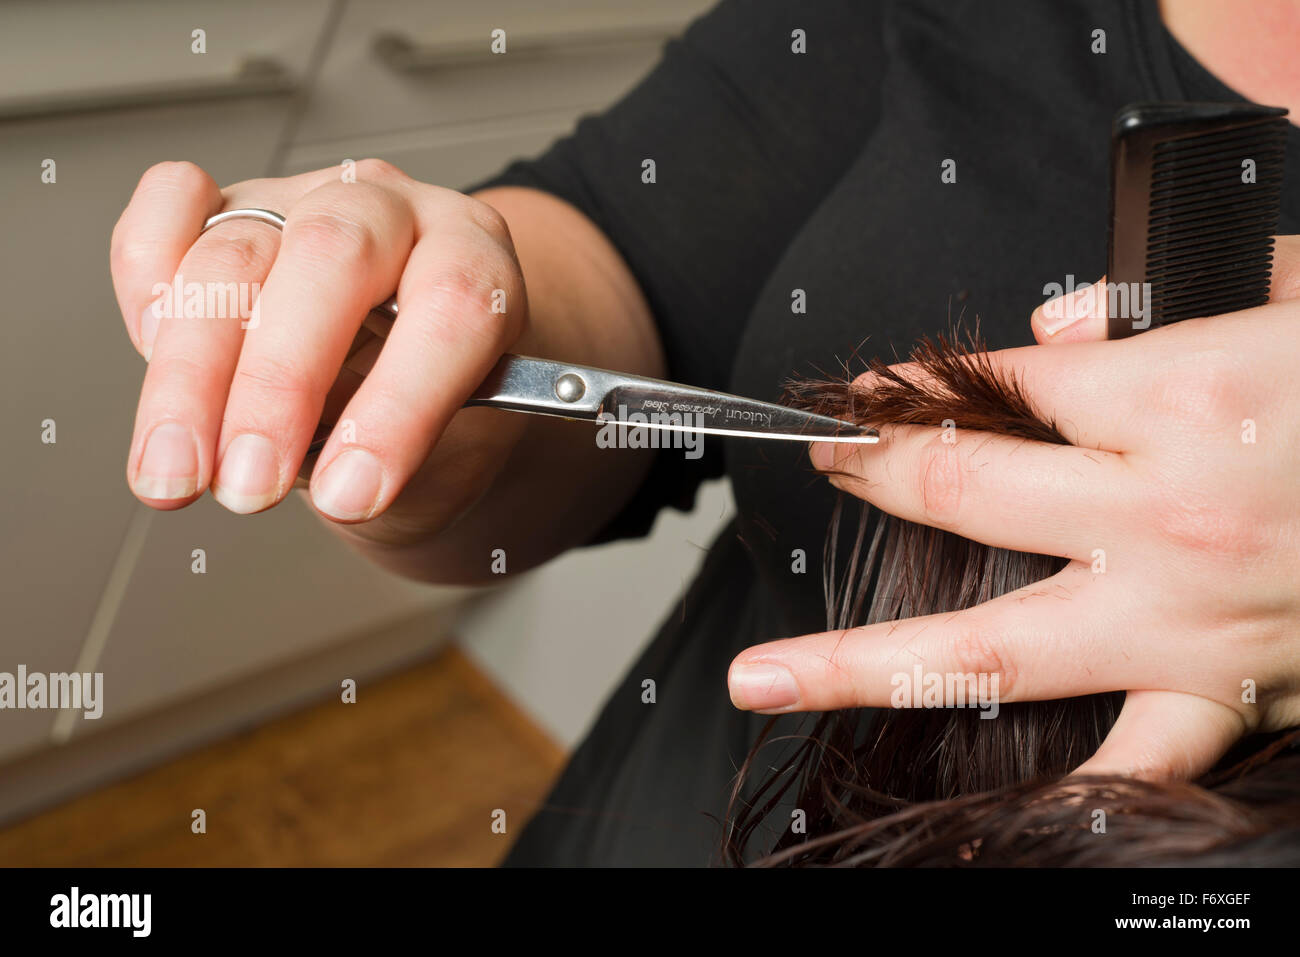 Home hairdresser visit. Traveling hair stylist who comes to your home to cut, style or colour ones hair. Stock Photo